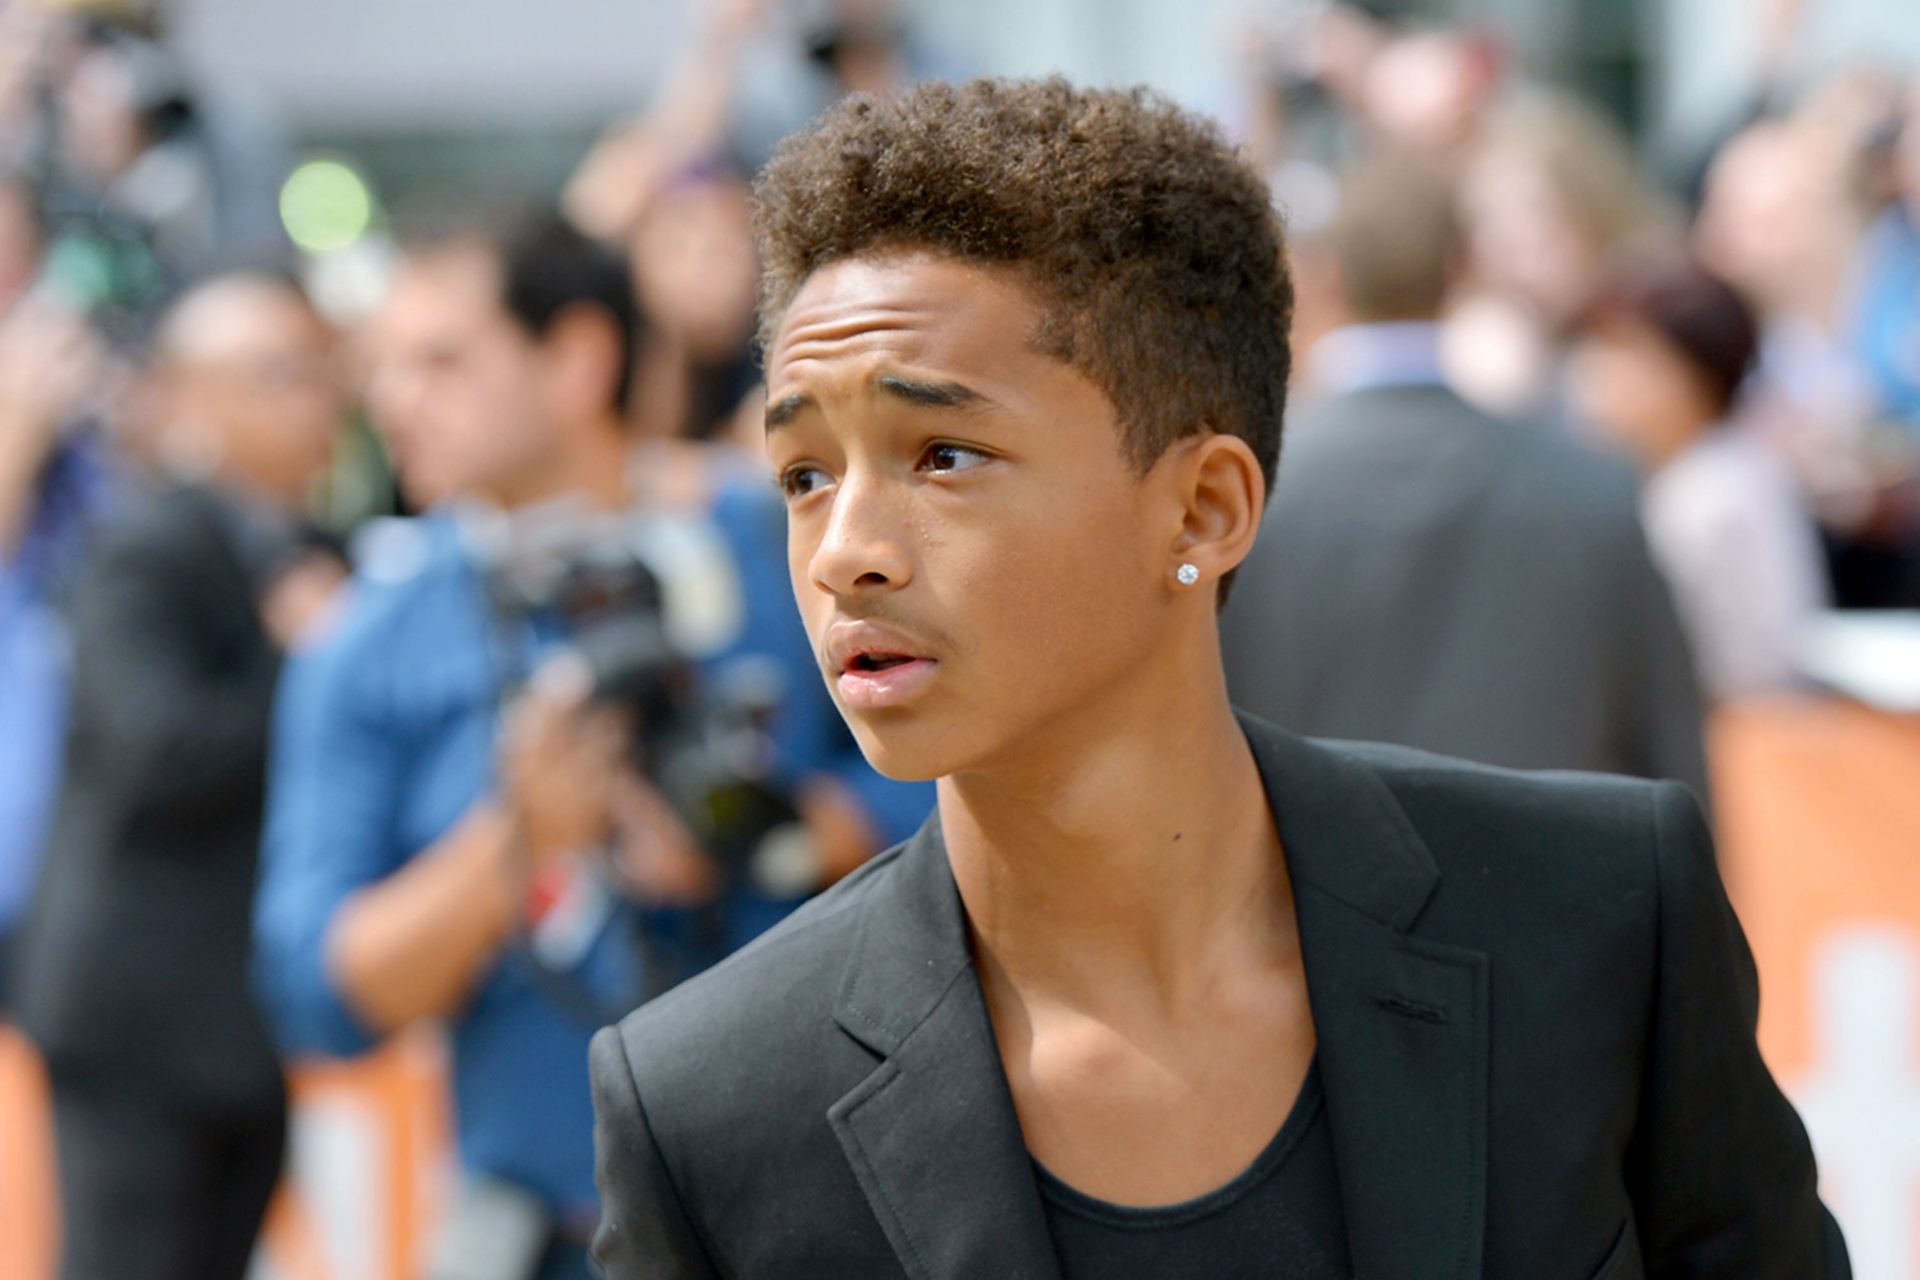 Jaden Smith - "If everybody in the world dropped out of school, we would have a much more intelligent society."